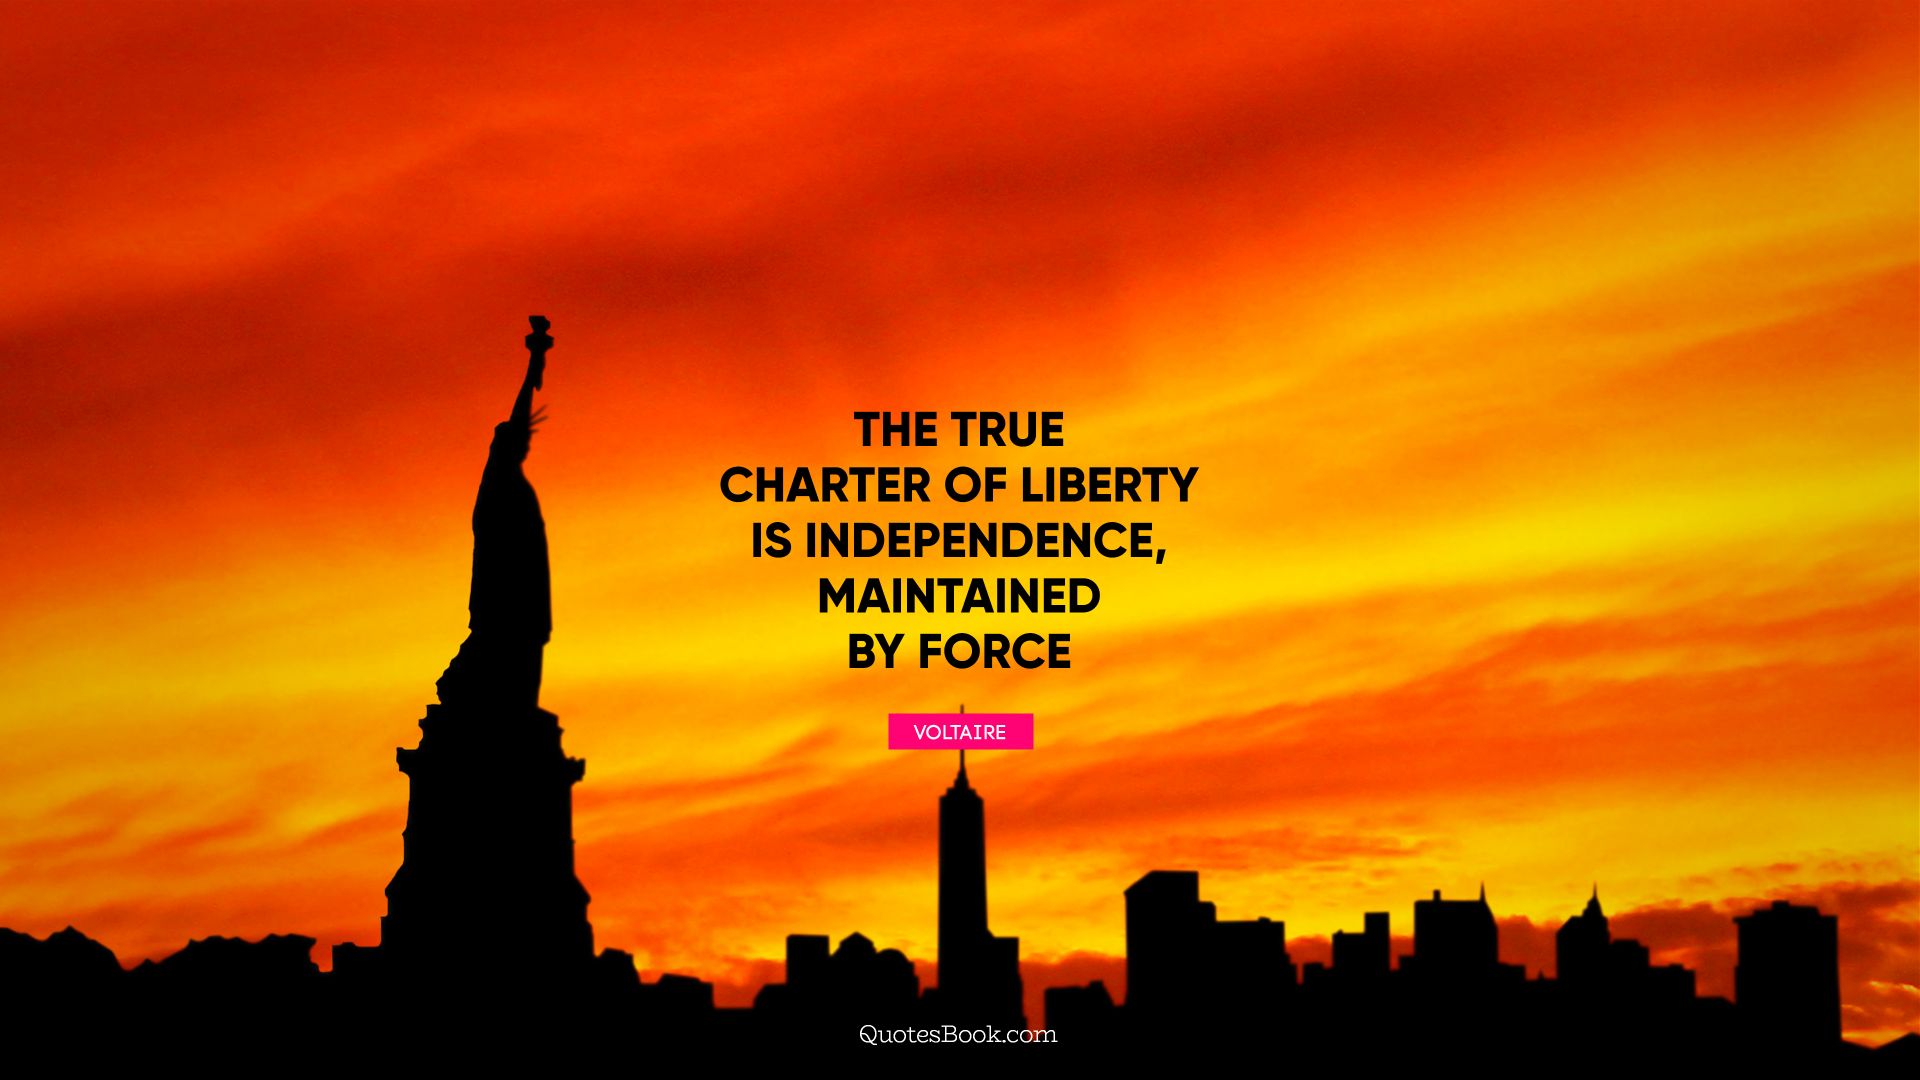 The true charter of liberty is independence, maintained by force. - Quote by Voltaire